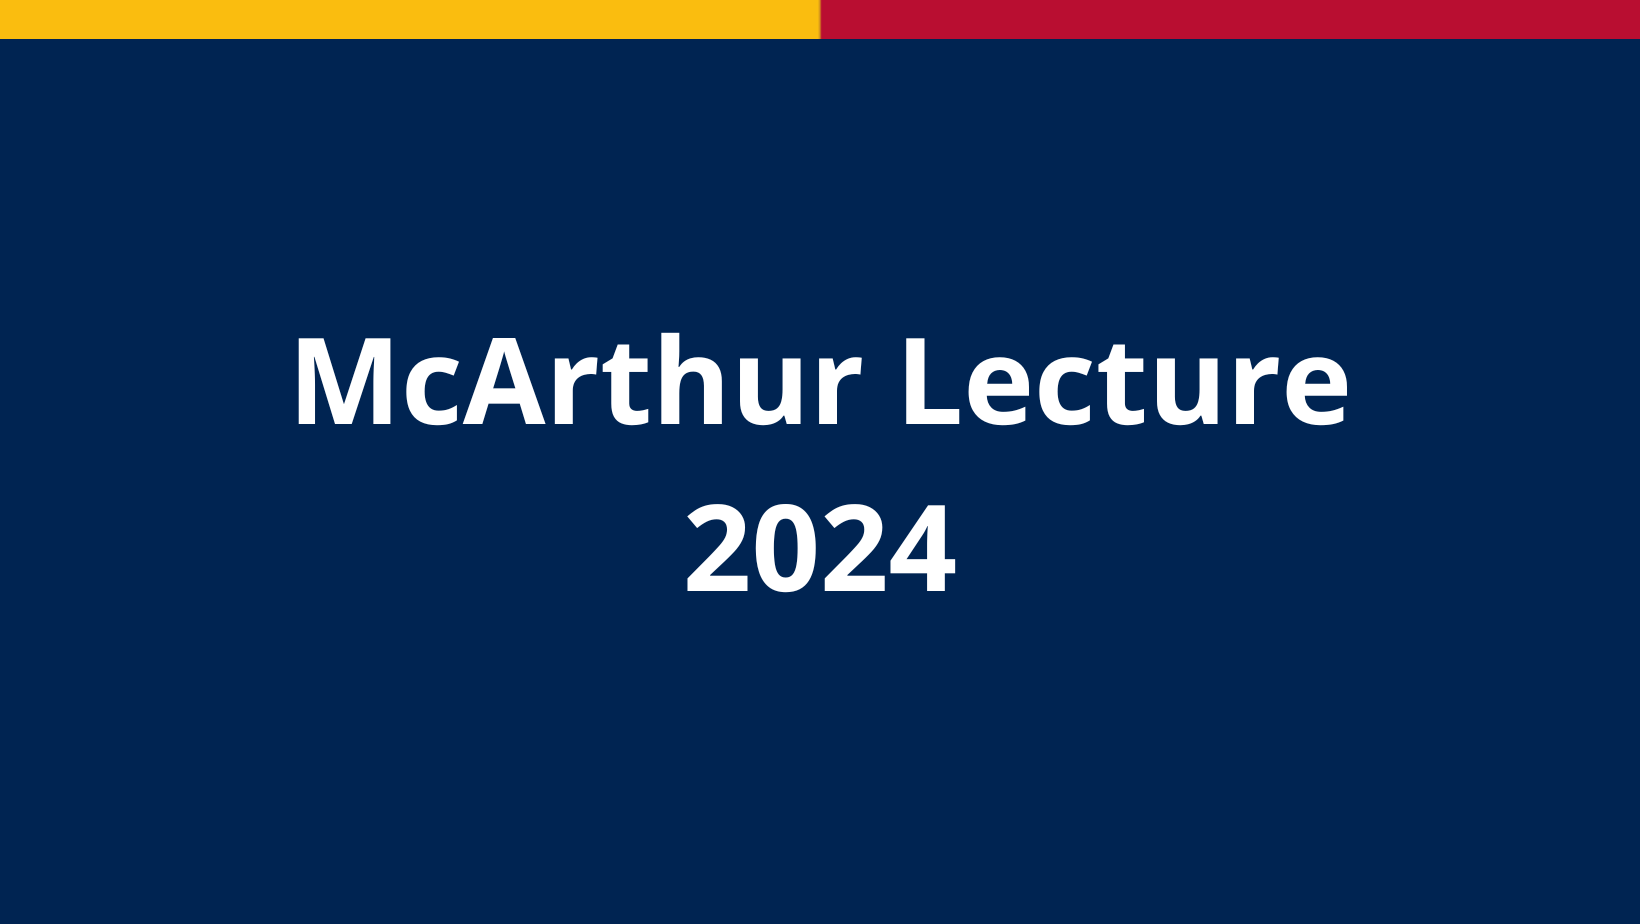 Graphic that reads "McArthur Lecture 2024" with a blue background and a thin yellow and red trim bar at the top.